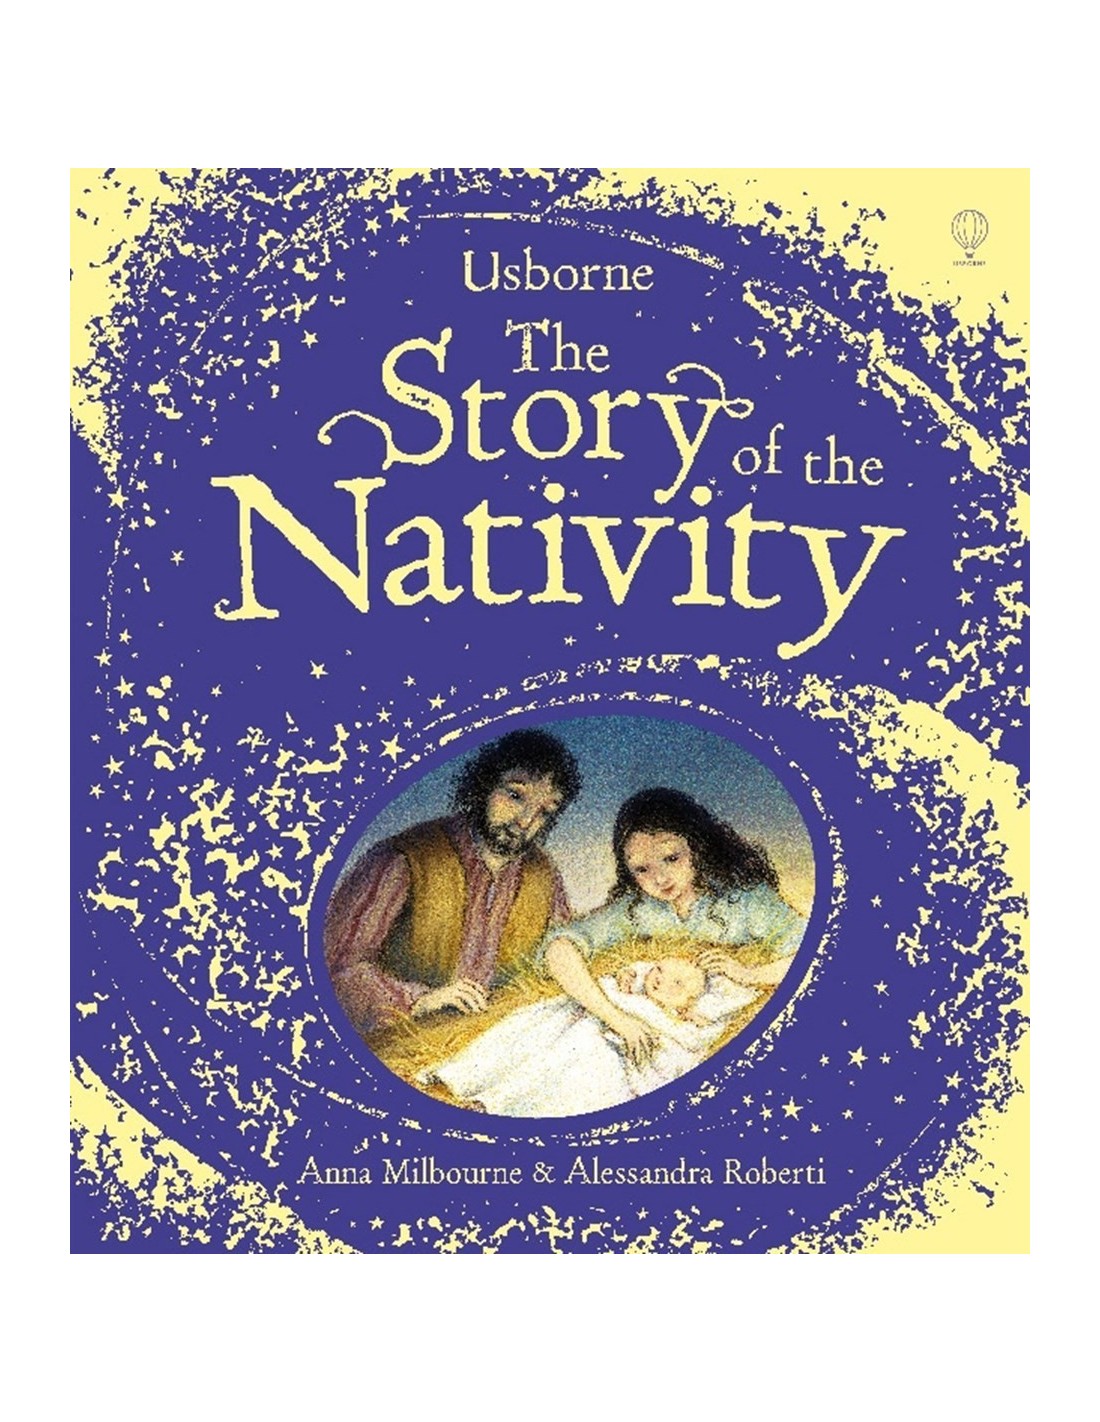 The story of the Nativity